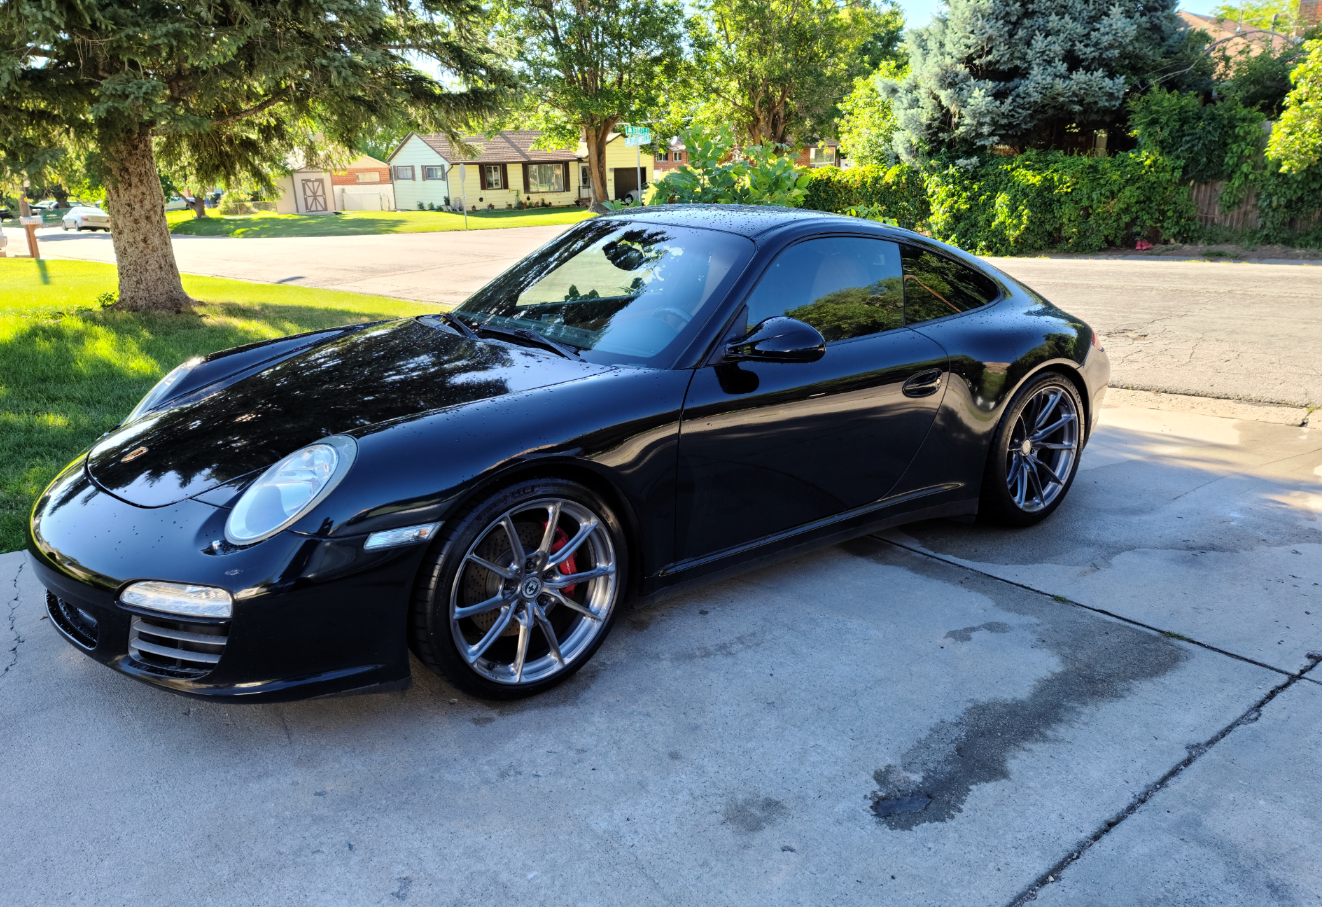 2009 Porsche 911 - 2009 Porsche Carrera 911 4S - Used - VIN WP0AB29979S721882 - 148,800 Miles - 6 cyl - AWD - Manual - Coupe - Black - Ogden, UT 84404, United States